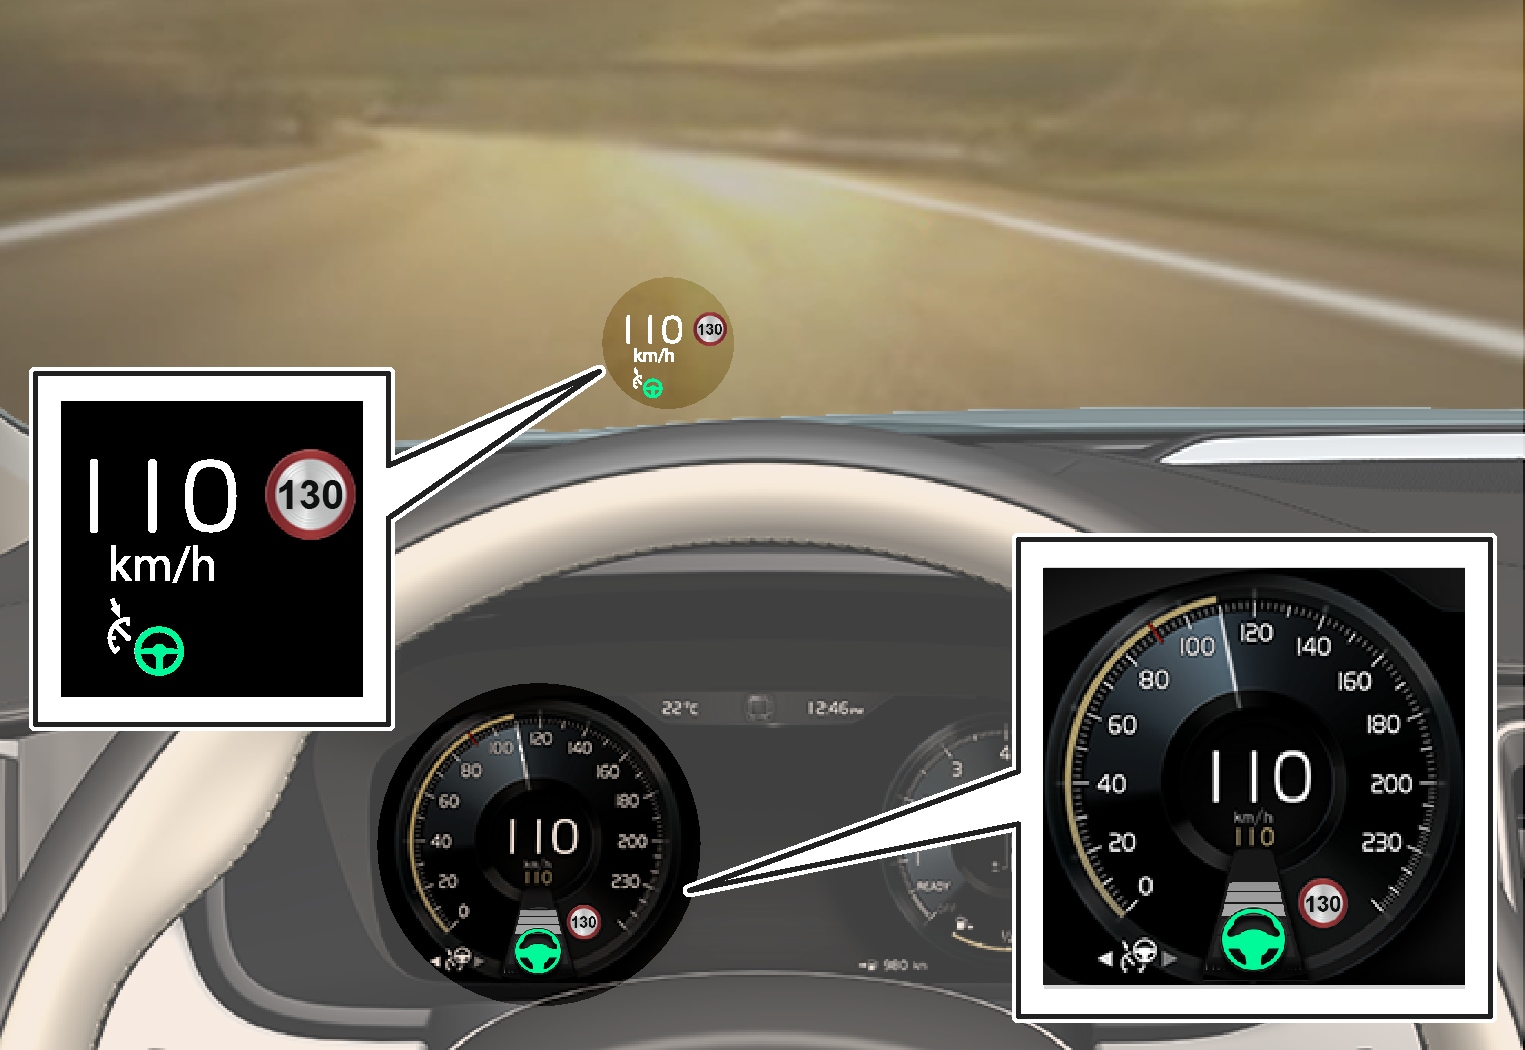 P5-V90/S90-1646-Pilot Assist, set to maintain 110 km/h, no vehicle ahead to follow and steering assistance